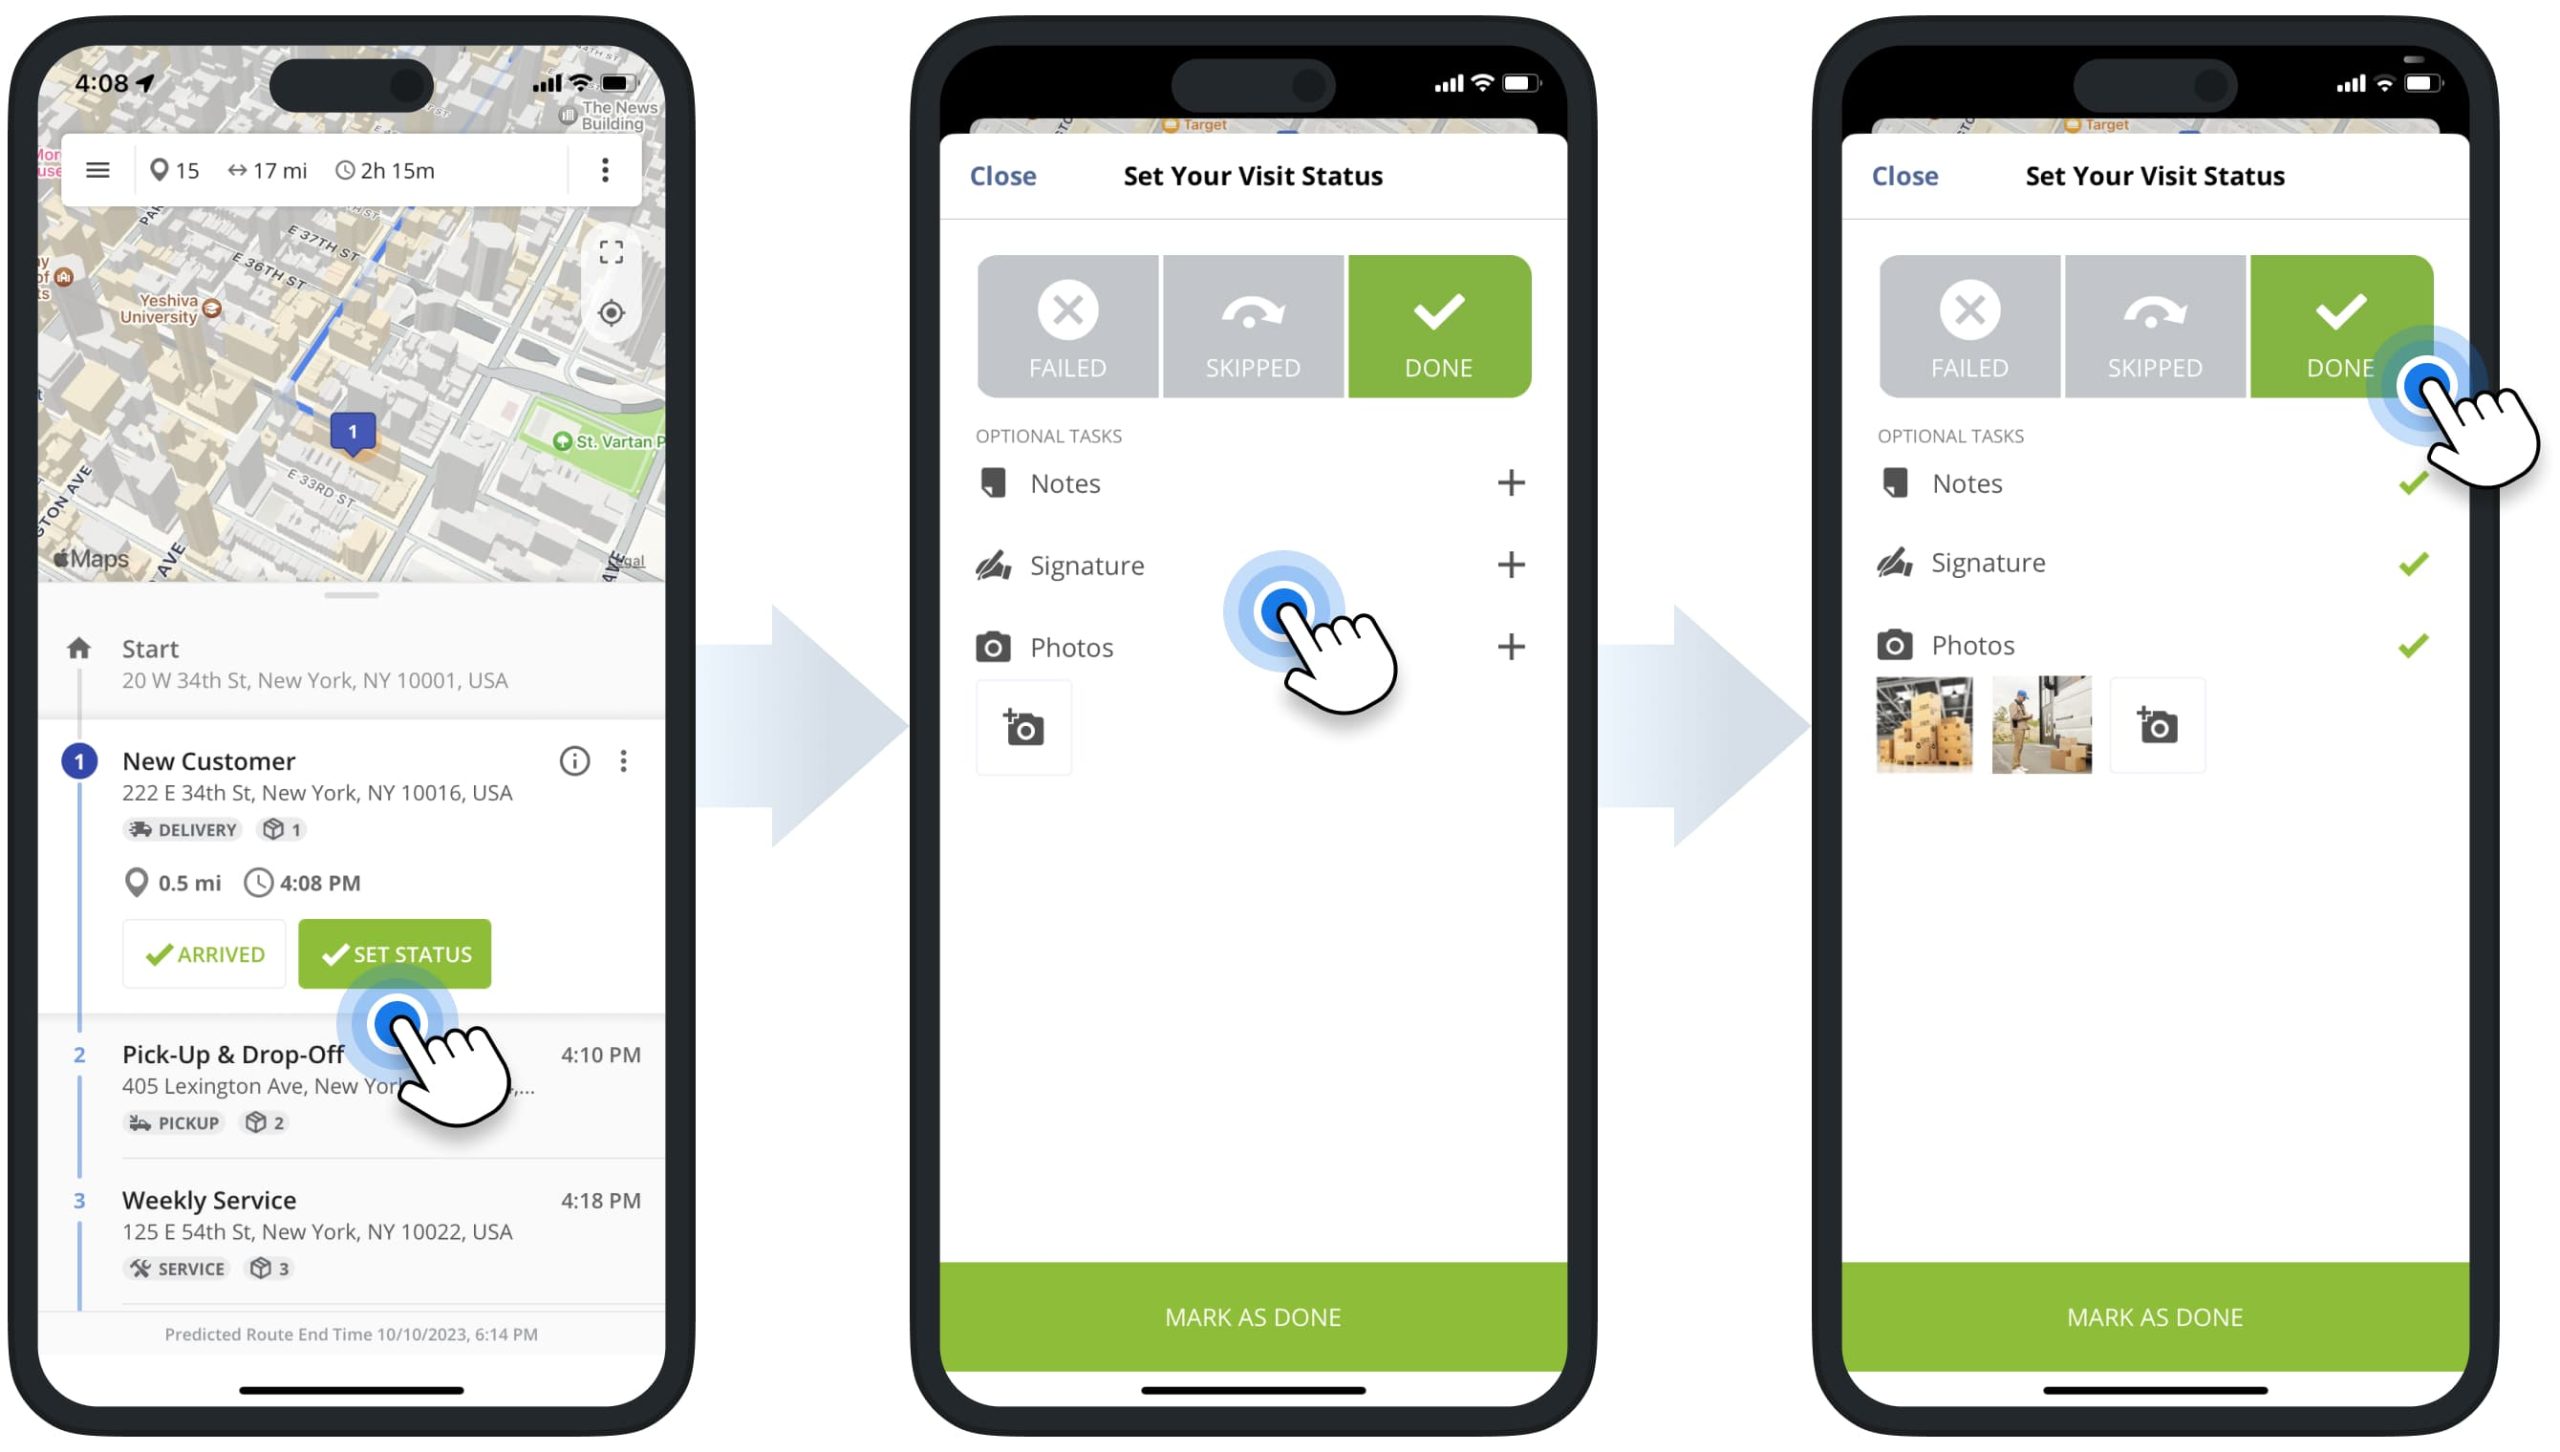 Attaching such proof of visit, delivery, or service to route stops as electronic signatures, photos, and text notes on the iPhone Route Planner app.